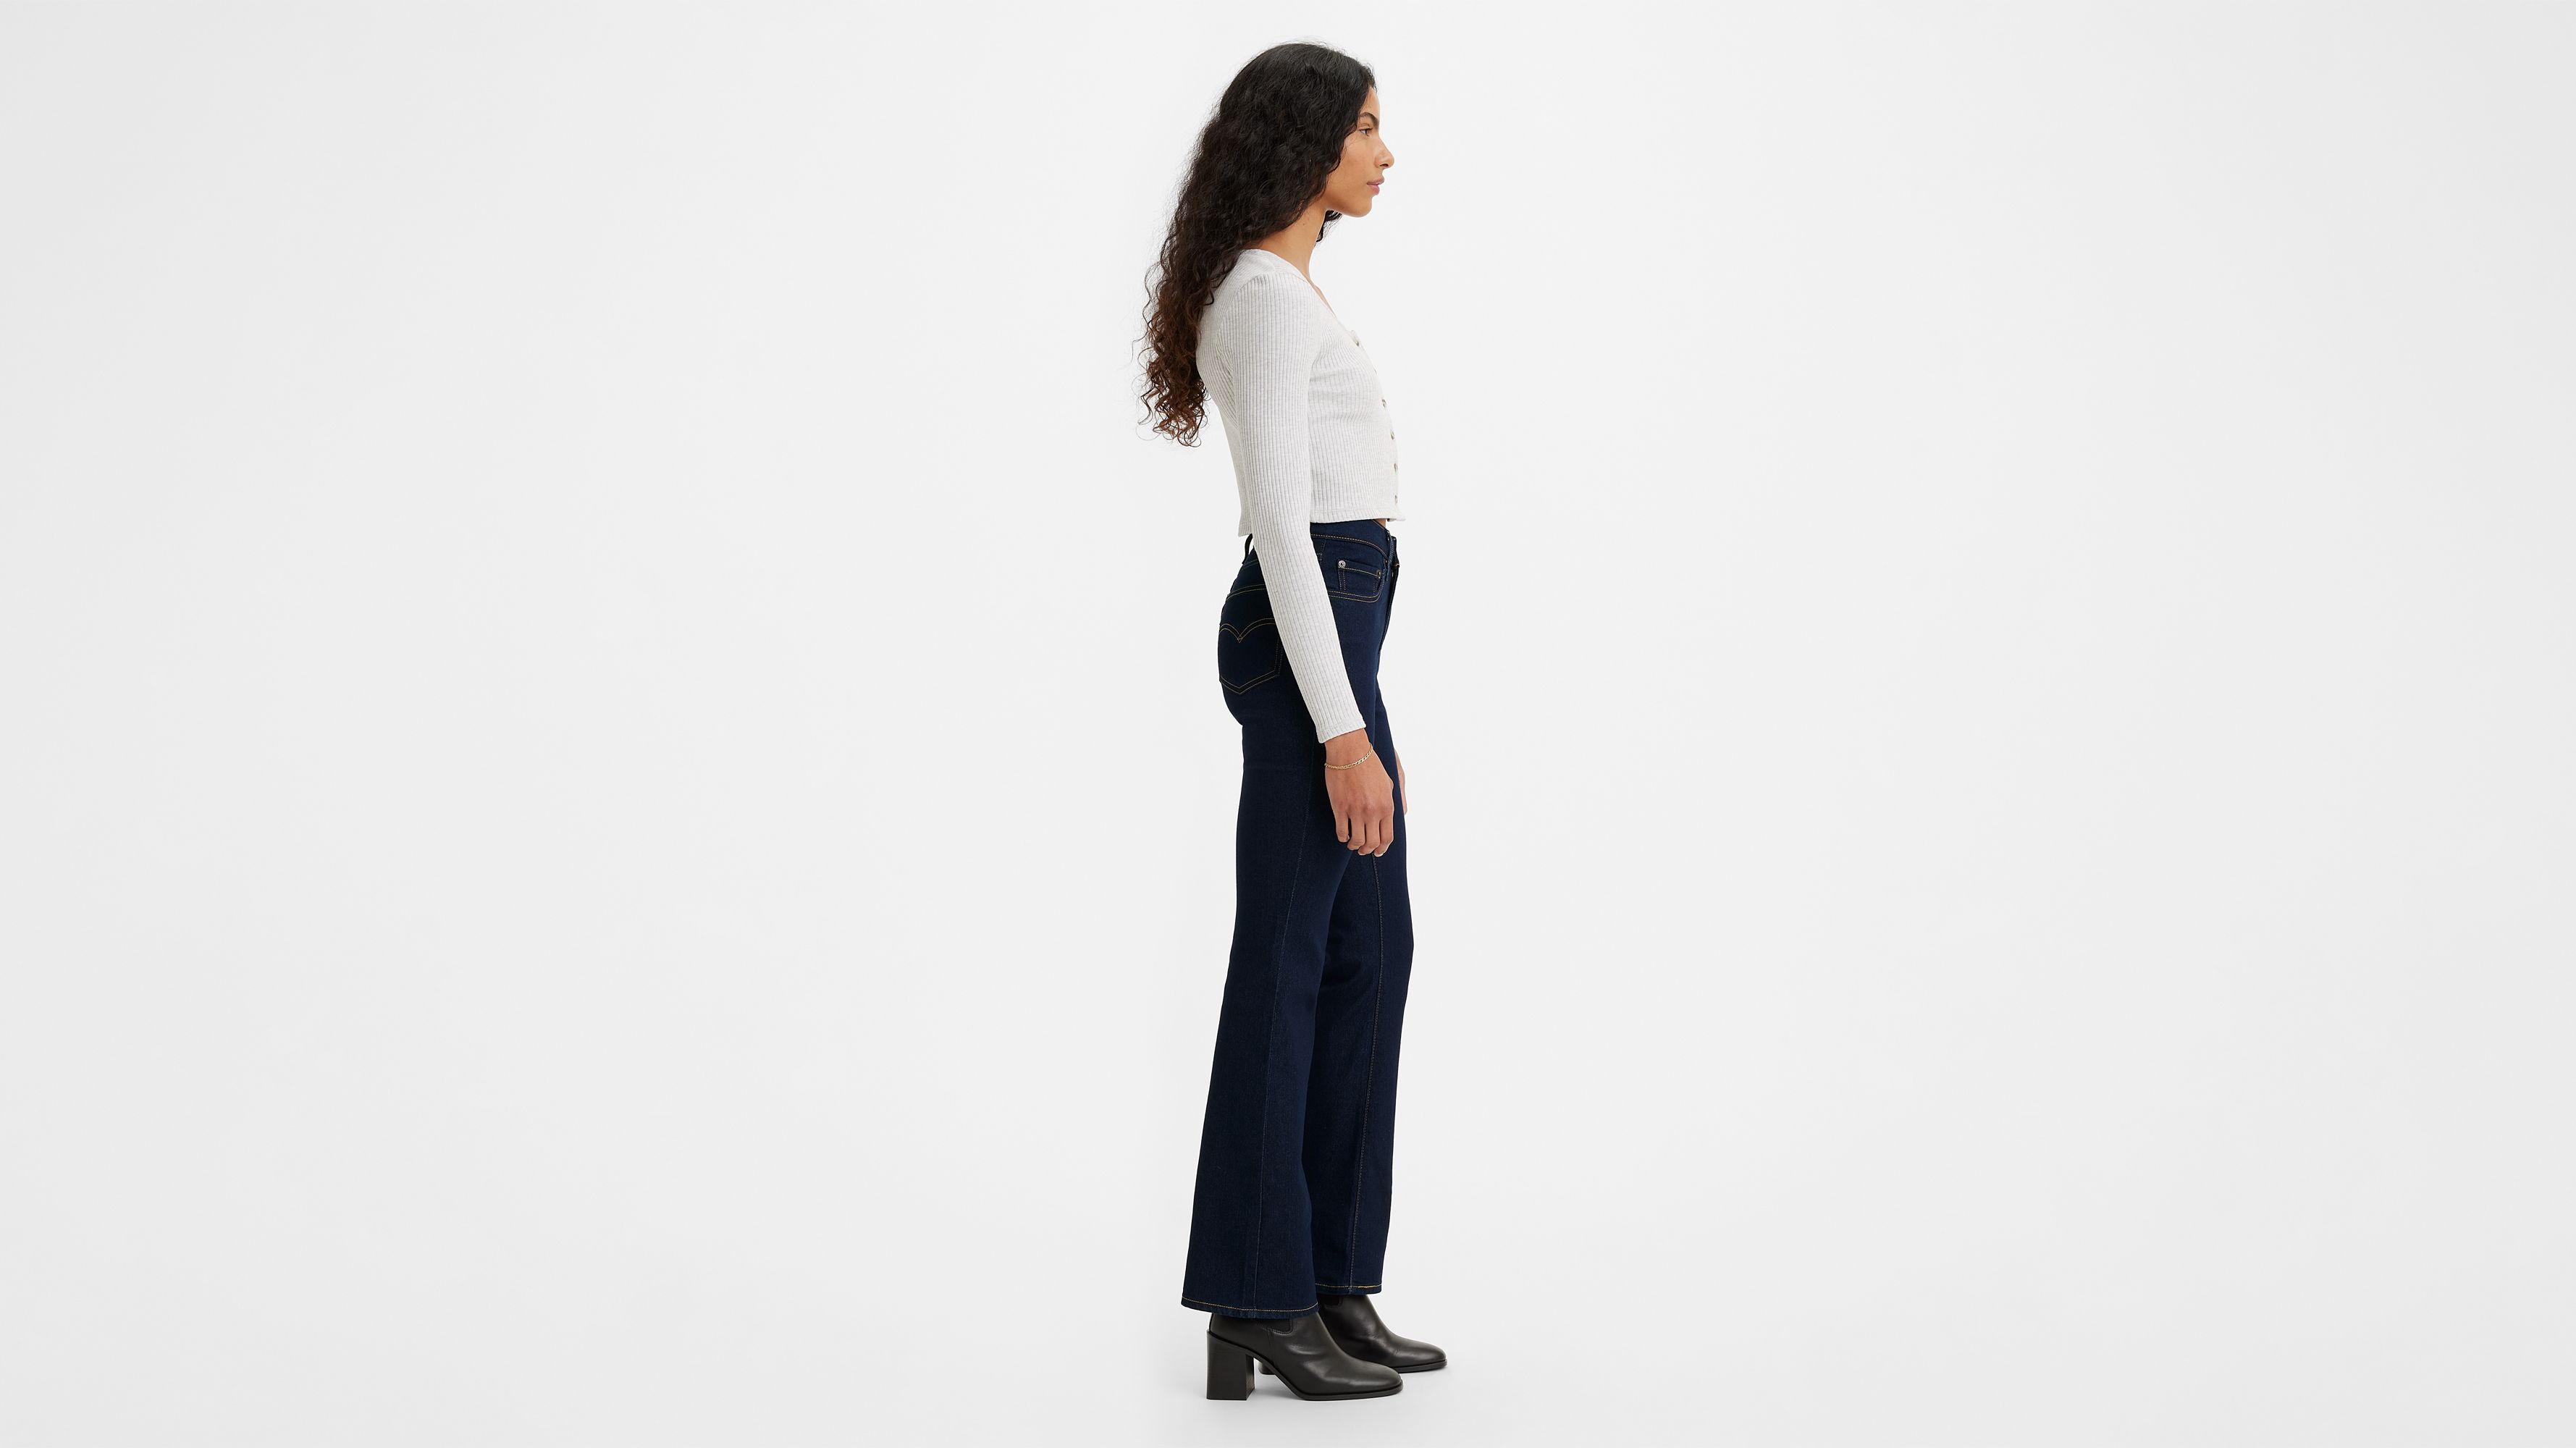 levis bootcut jeans for women